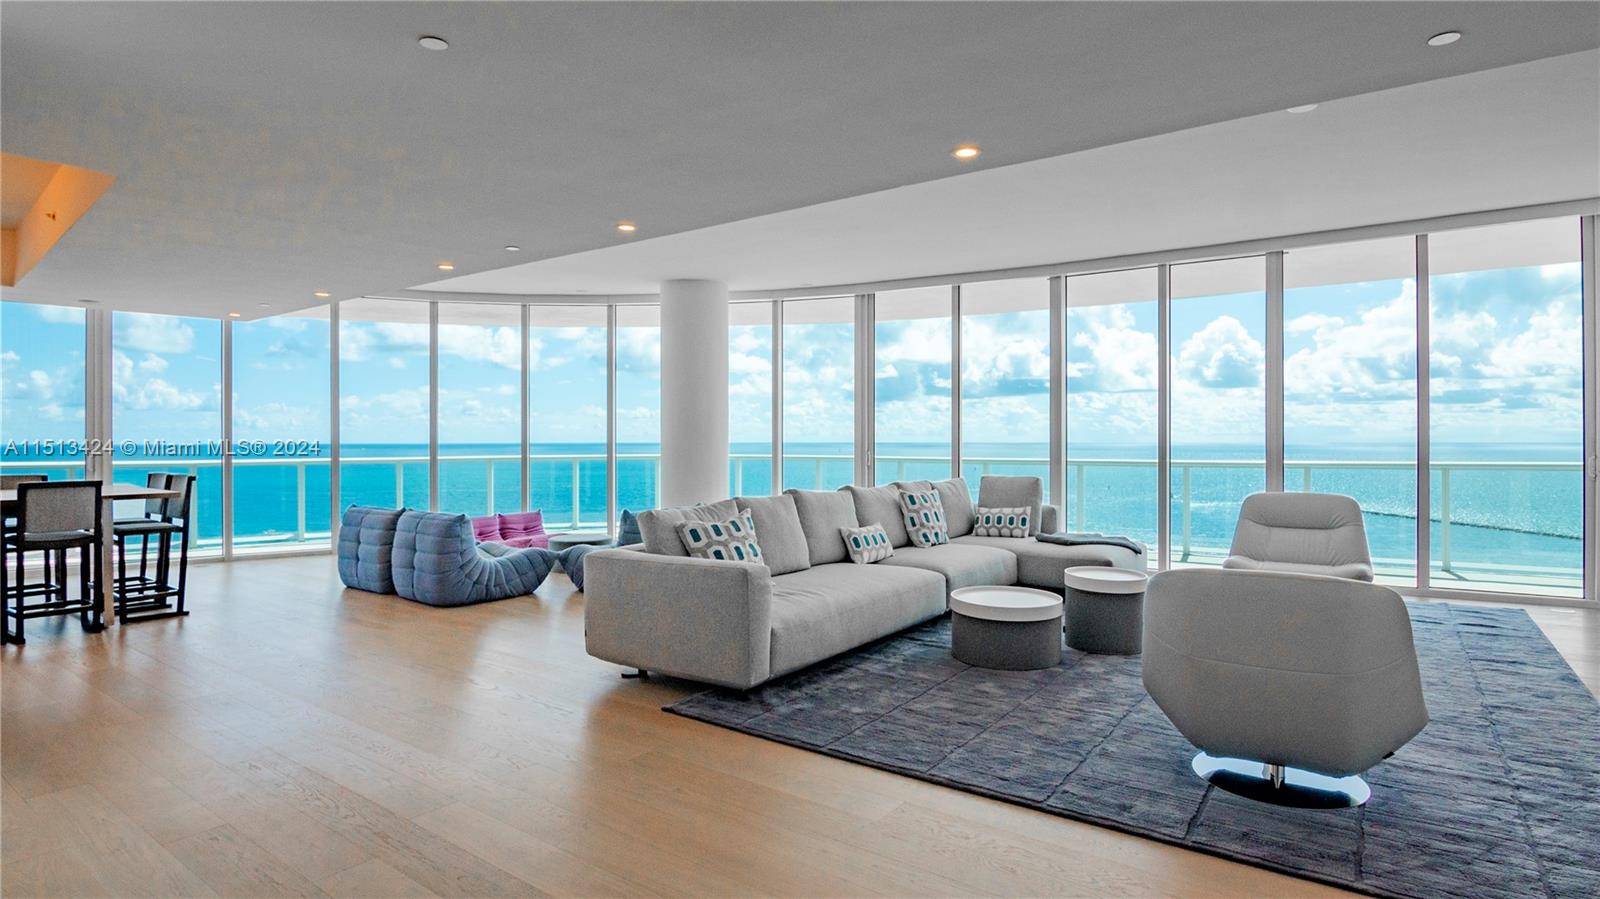 Rarely available and most coveted combination of 2 units with direct ocean views.